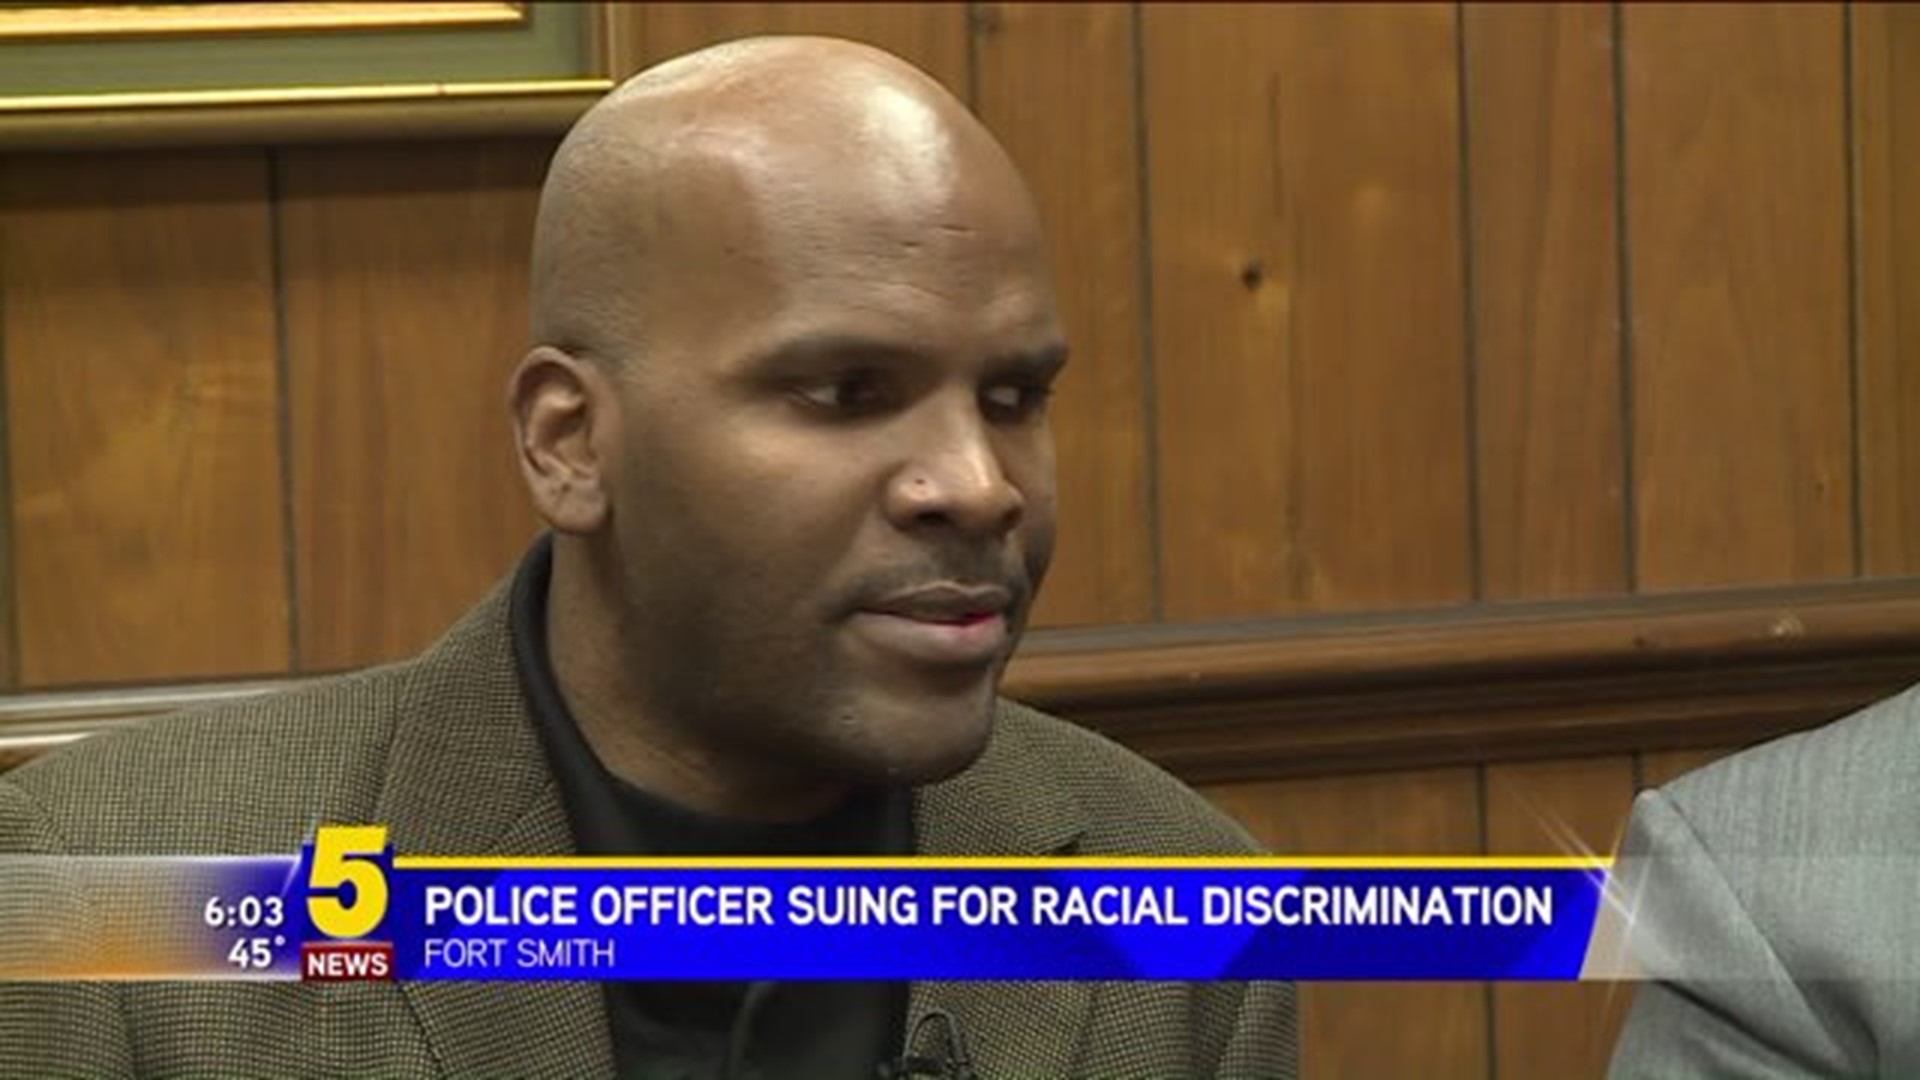 Police Officer Speaks Out About Discrimination Lawsuit